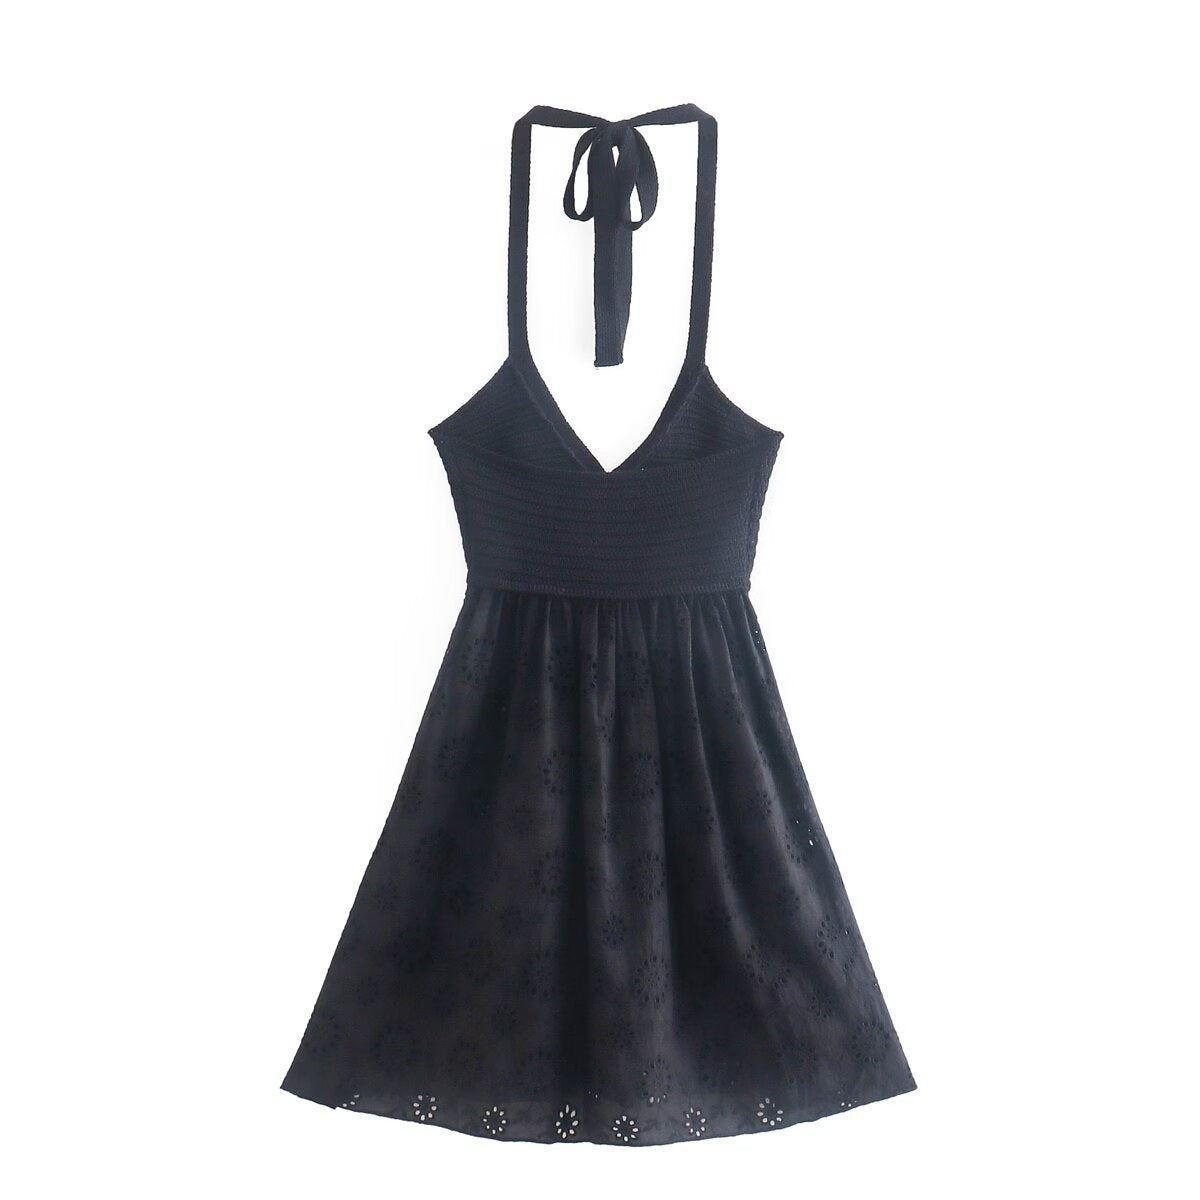 Women Clothing Hollow Out Cutout Embroidery Stitching Knitted Dress Halter Backless Mini Dress